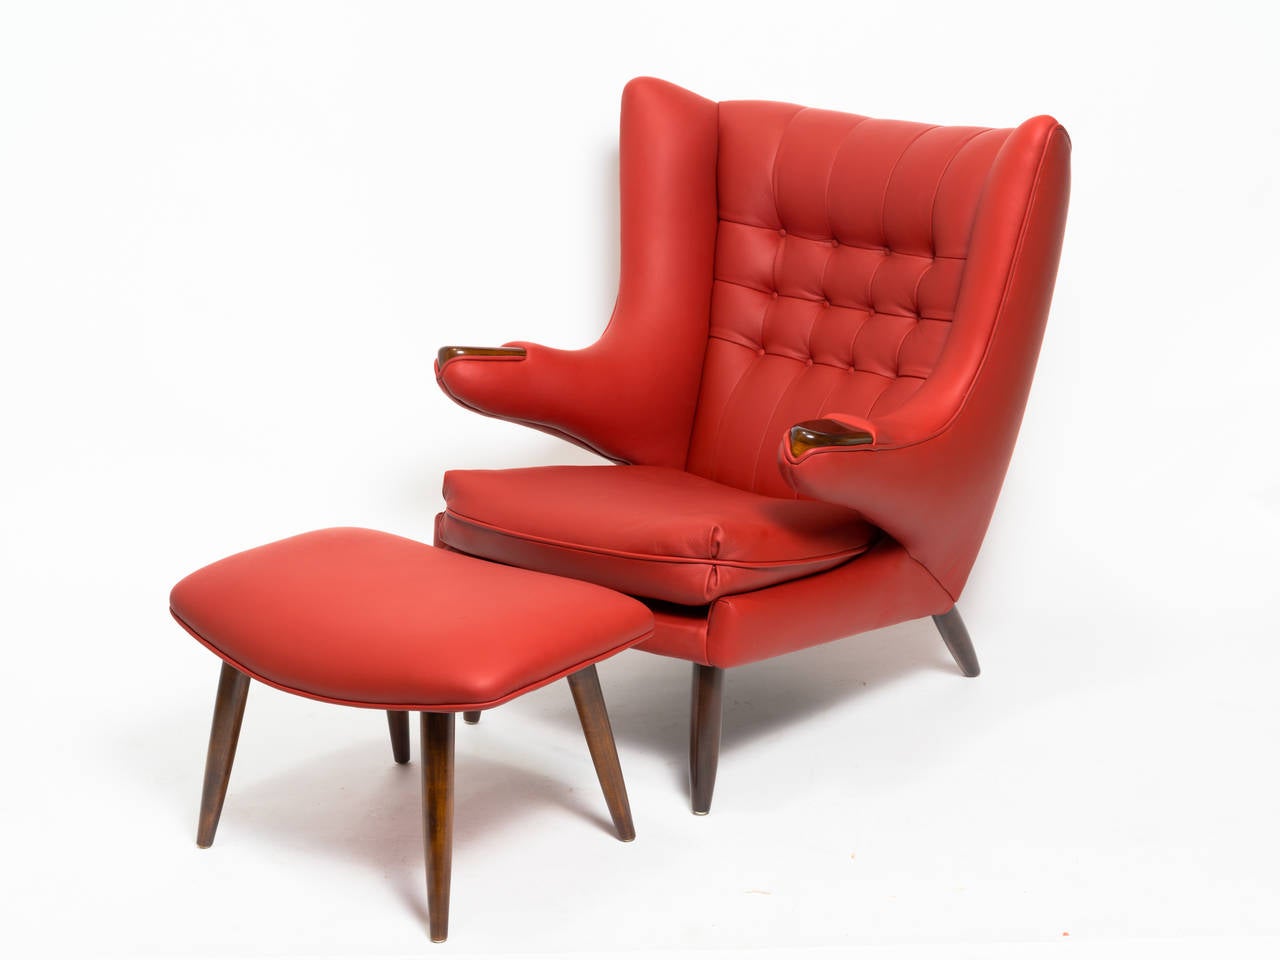 New reproduction of the Papa Bear chair upholstered in red leather made by master upholsterer. There is only one available.